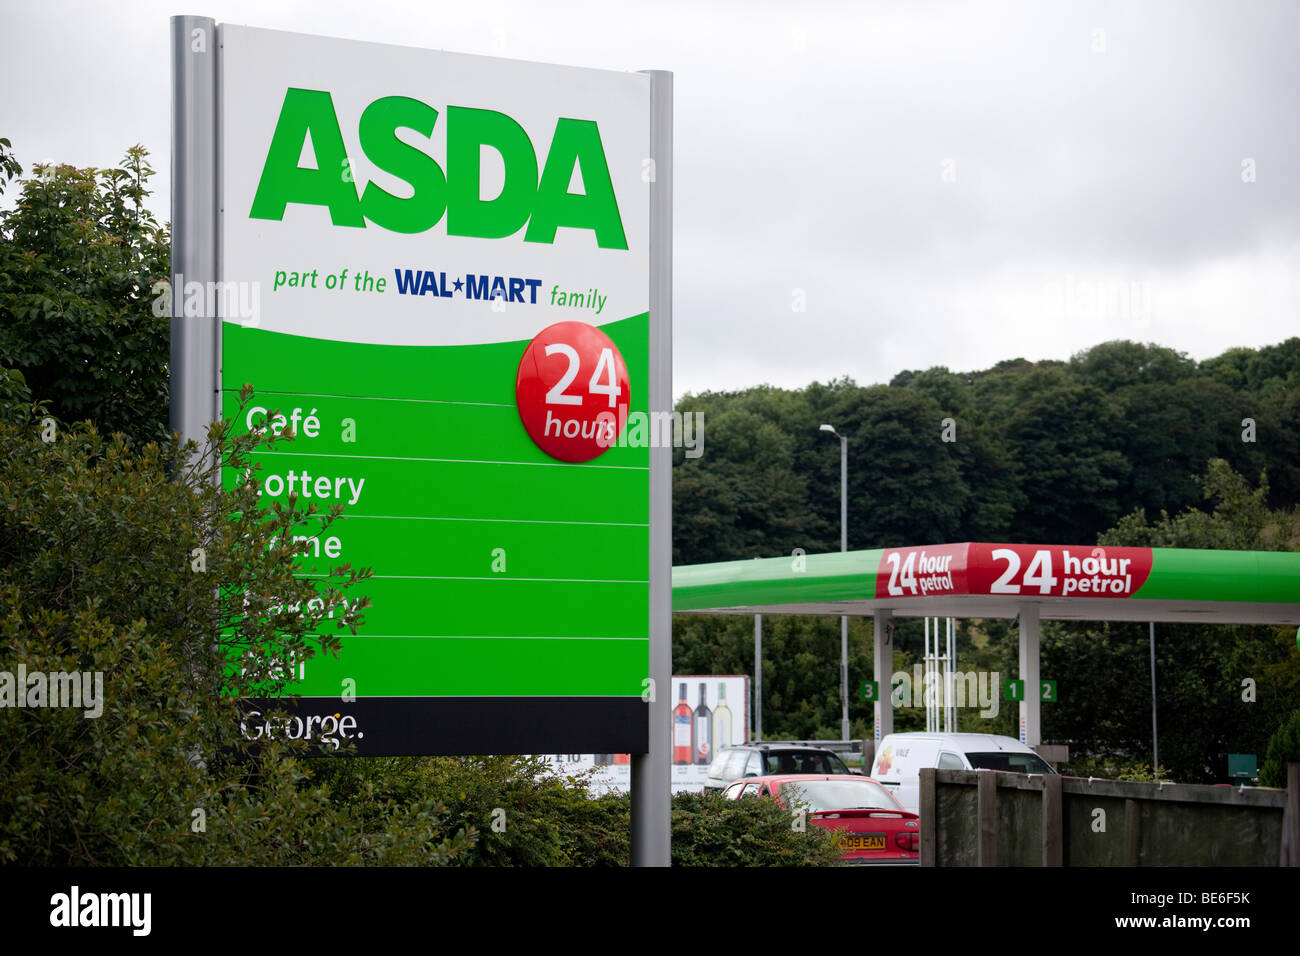 ASDA, part of Wal Mart family, supermarket, gas station, open 24 hours. Stock Photo